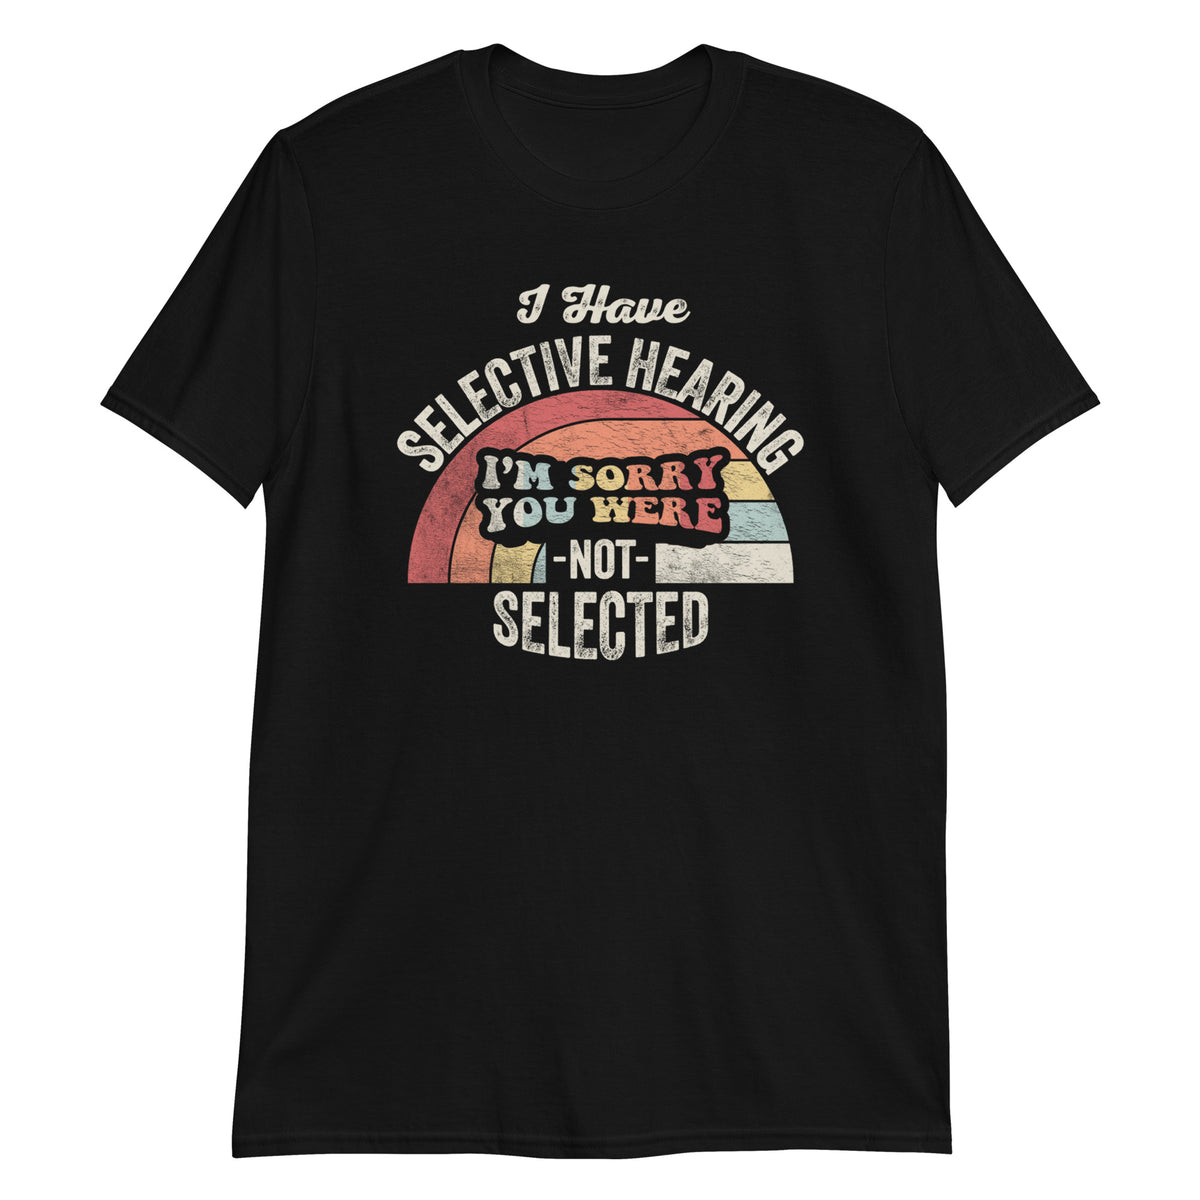 I Have Selective Hearning Sorry You Weren't Selected Today T-Shirt